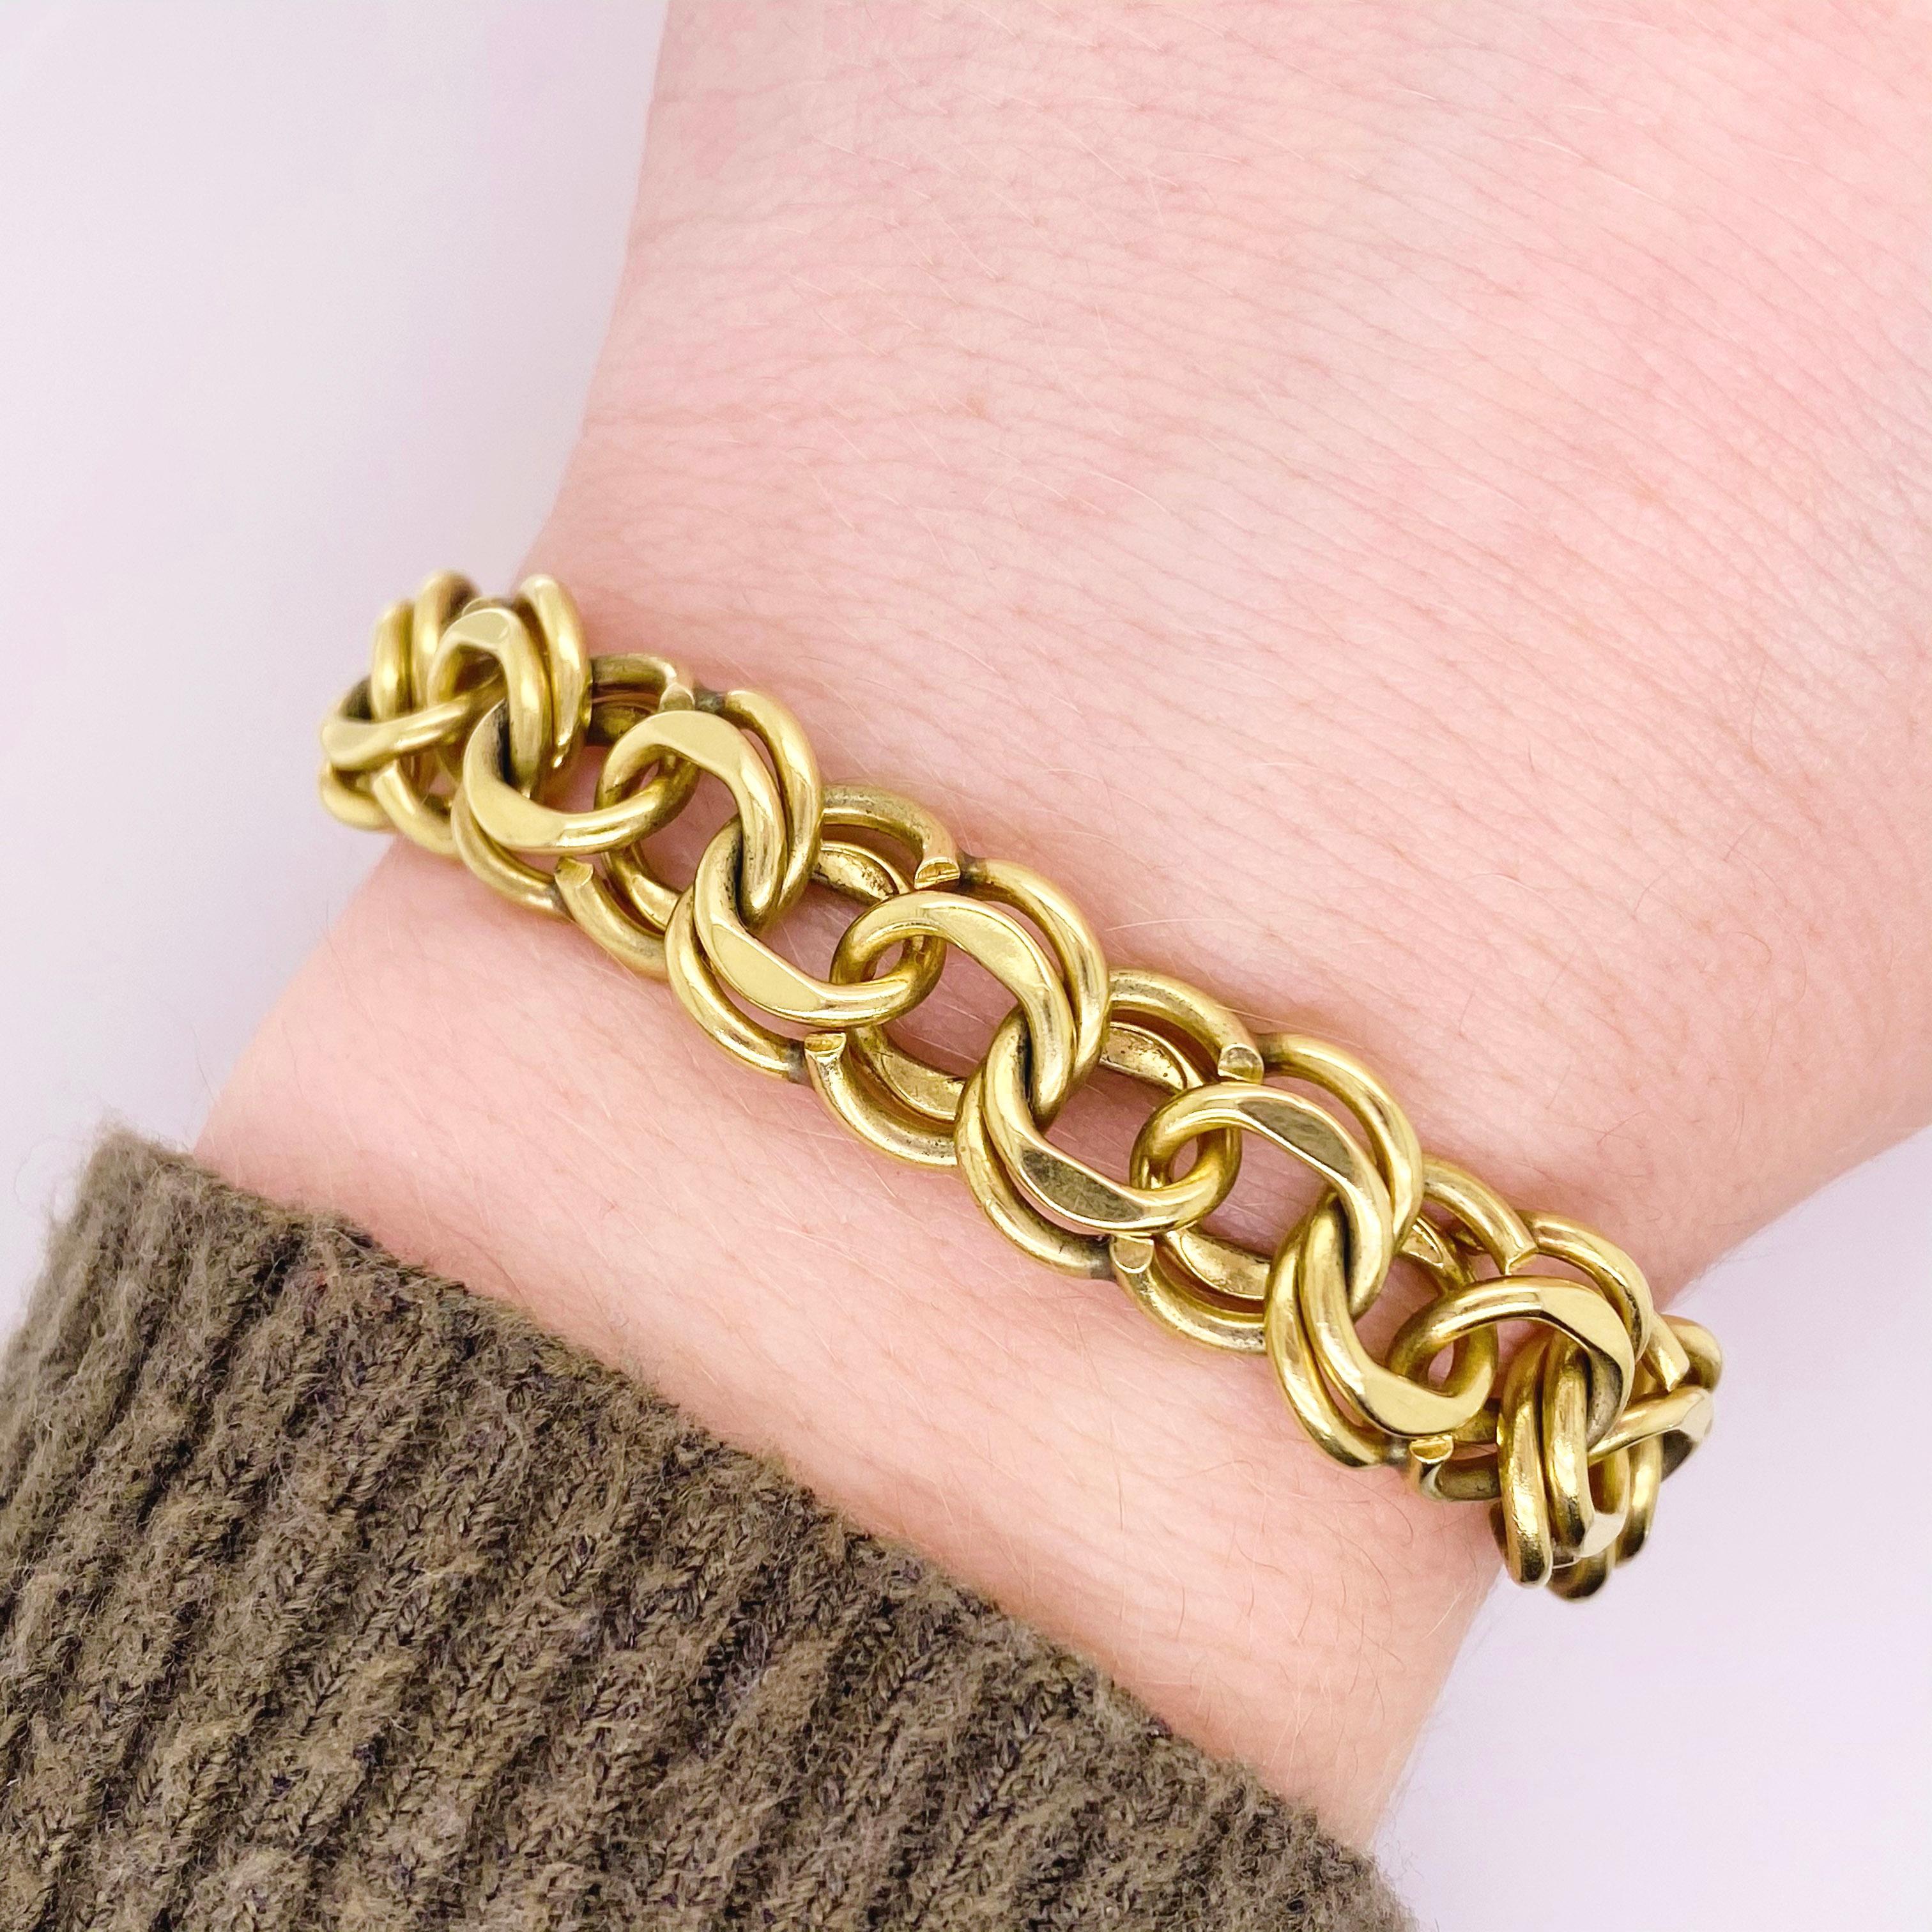 This is a handmade double link bracelet. Each link was hand made and put together to make this gorgeous, double link design. The bracelet is solid 14 karat yellow gold with a unique, one of a kind clasp. This clasp has a very special feature, there